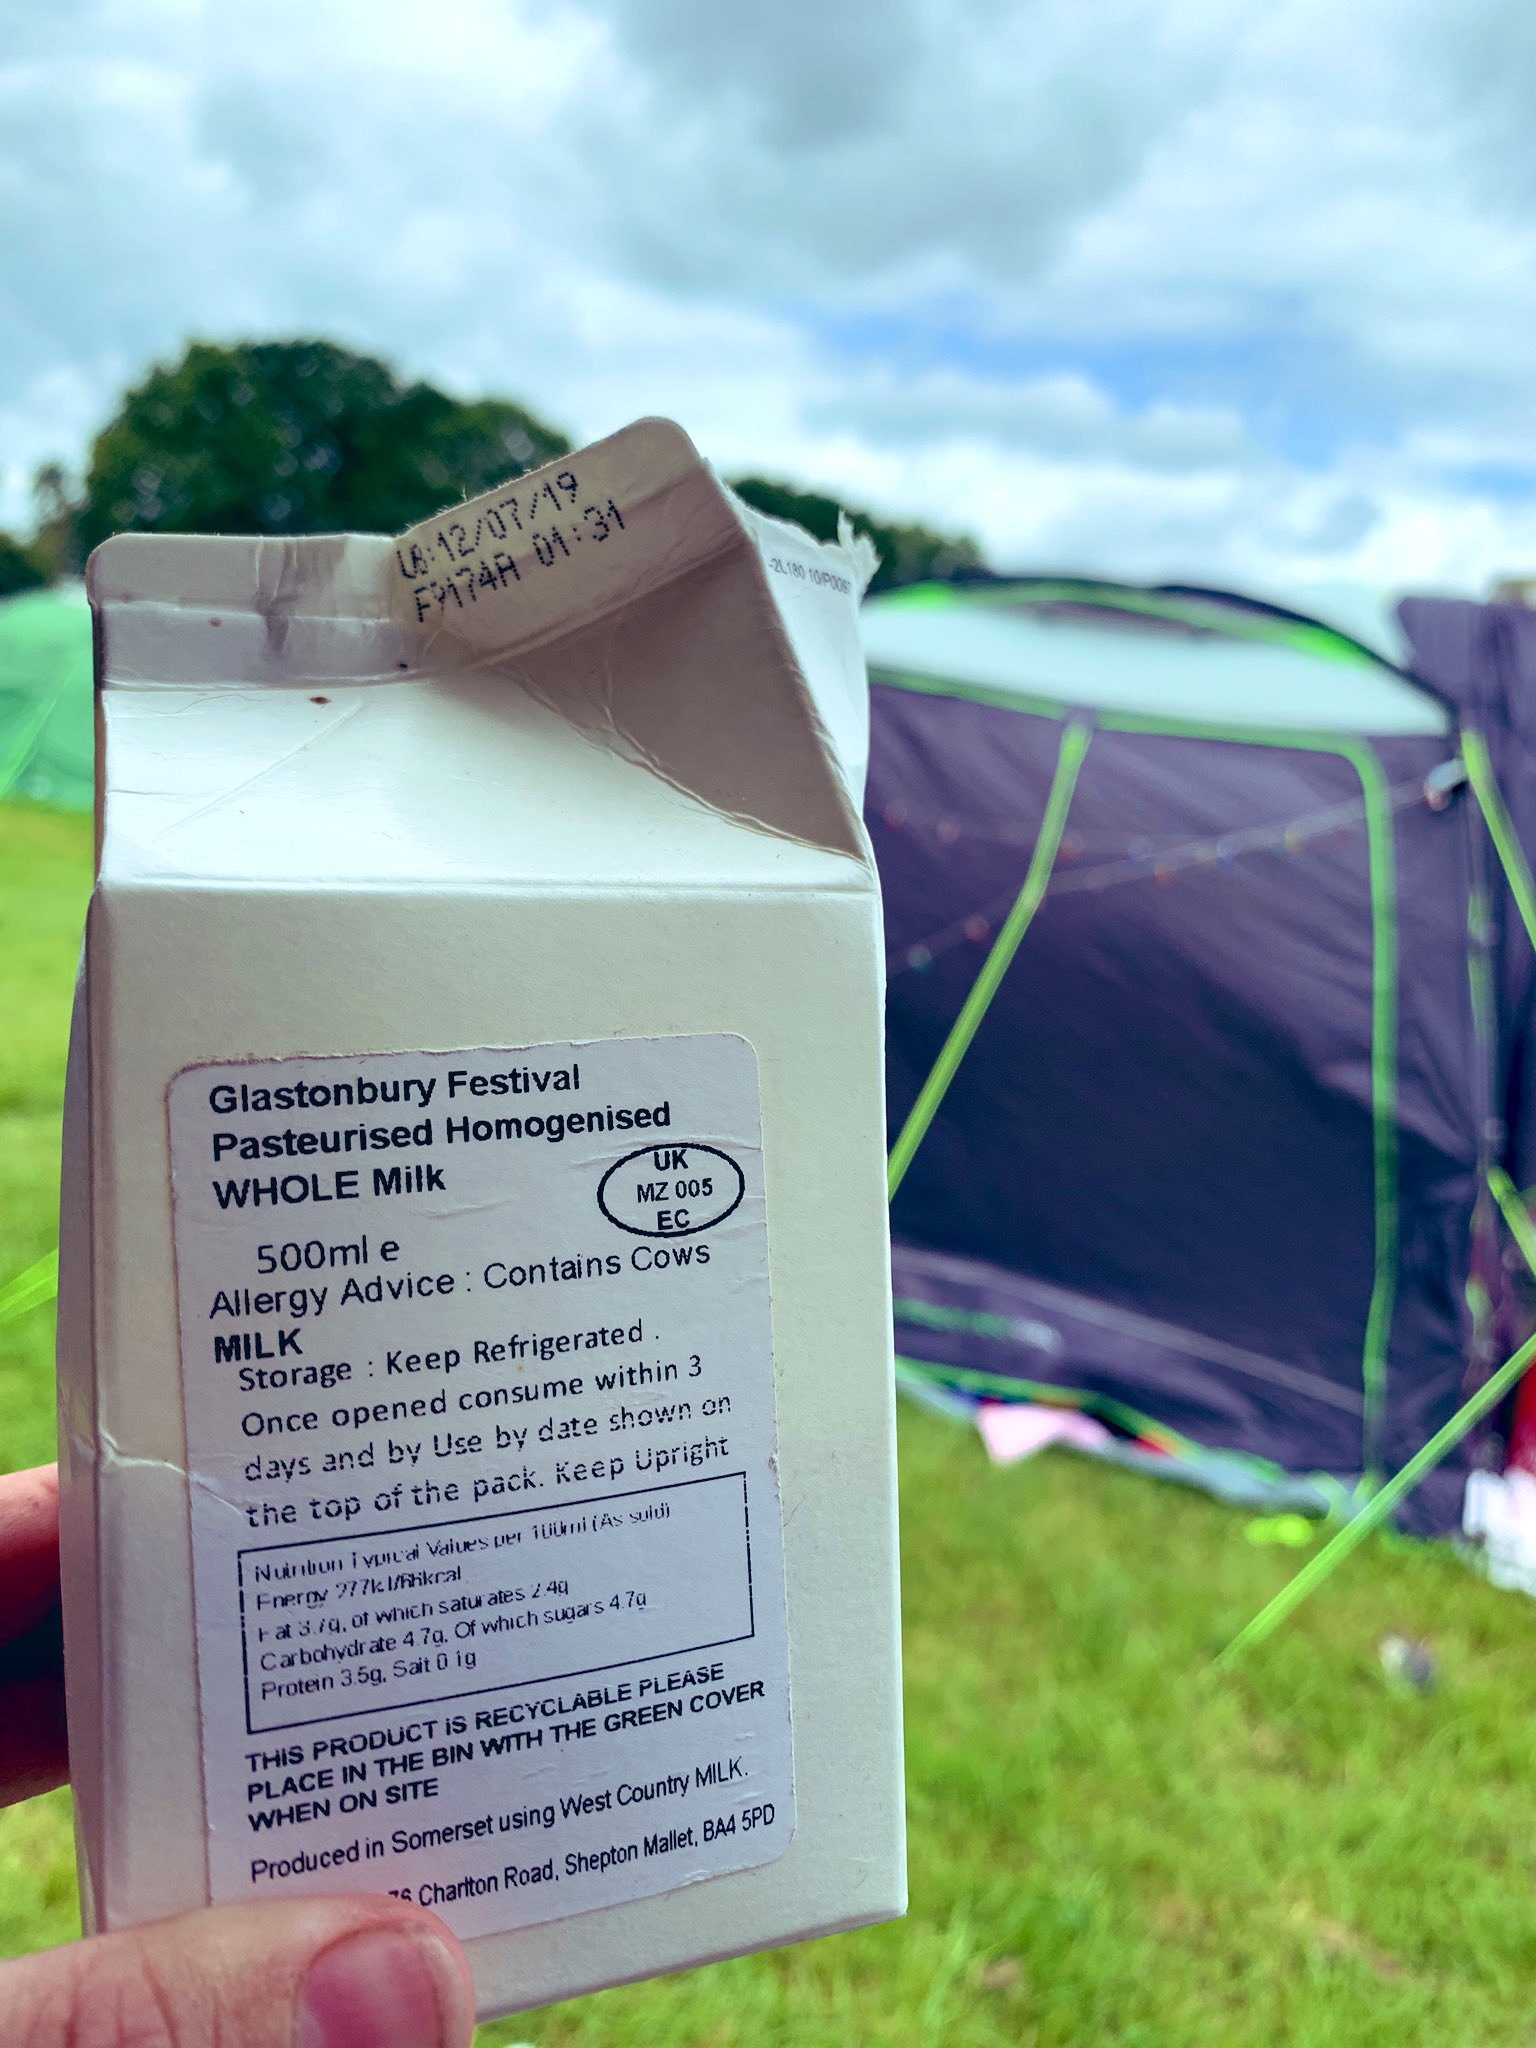 Glastonbury Live on Twitter: "Having a nice cup of tea with some delicious  Glastonbury Festival milk - you can taste the rock n' roll KG  https://t.co/scepmCwfiQ" / Twitter